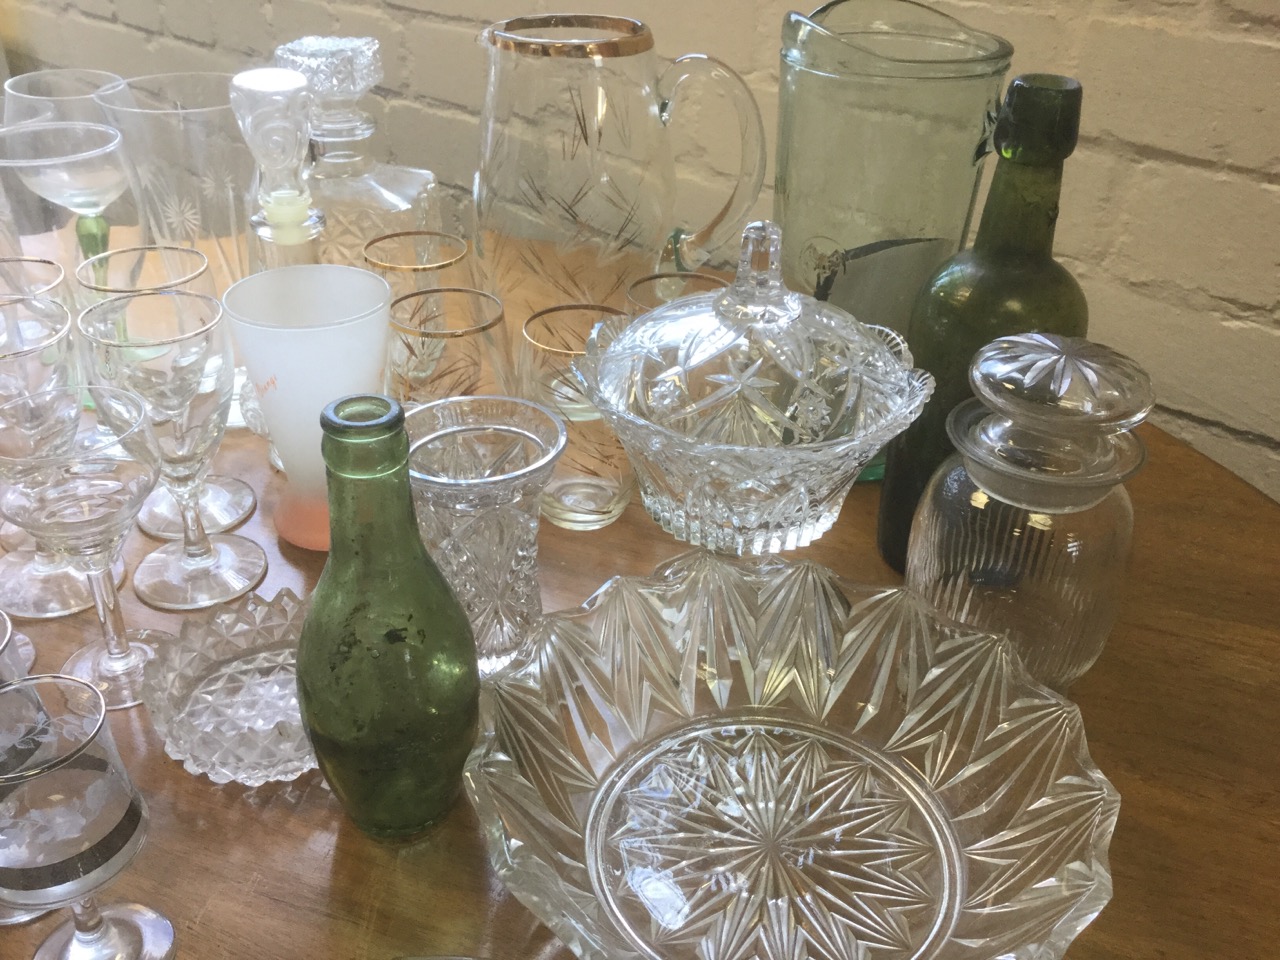 Miscellaneous glass including an Alnwick Brewery bottle, sets of glasses, fruit bowls, a - Image 3 of 6